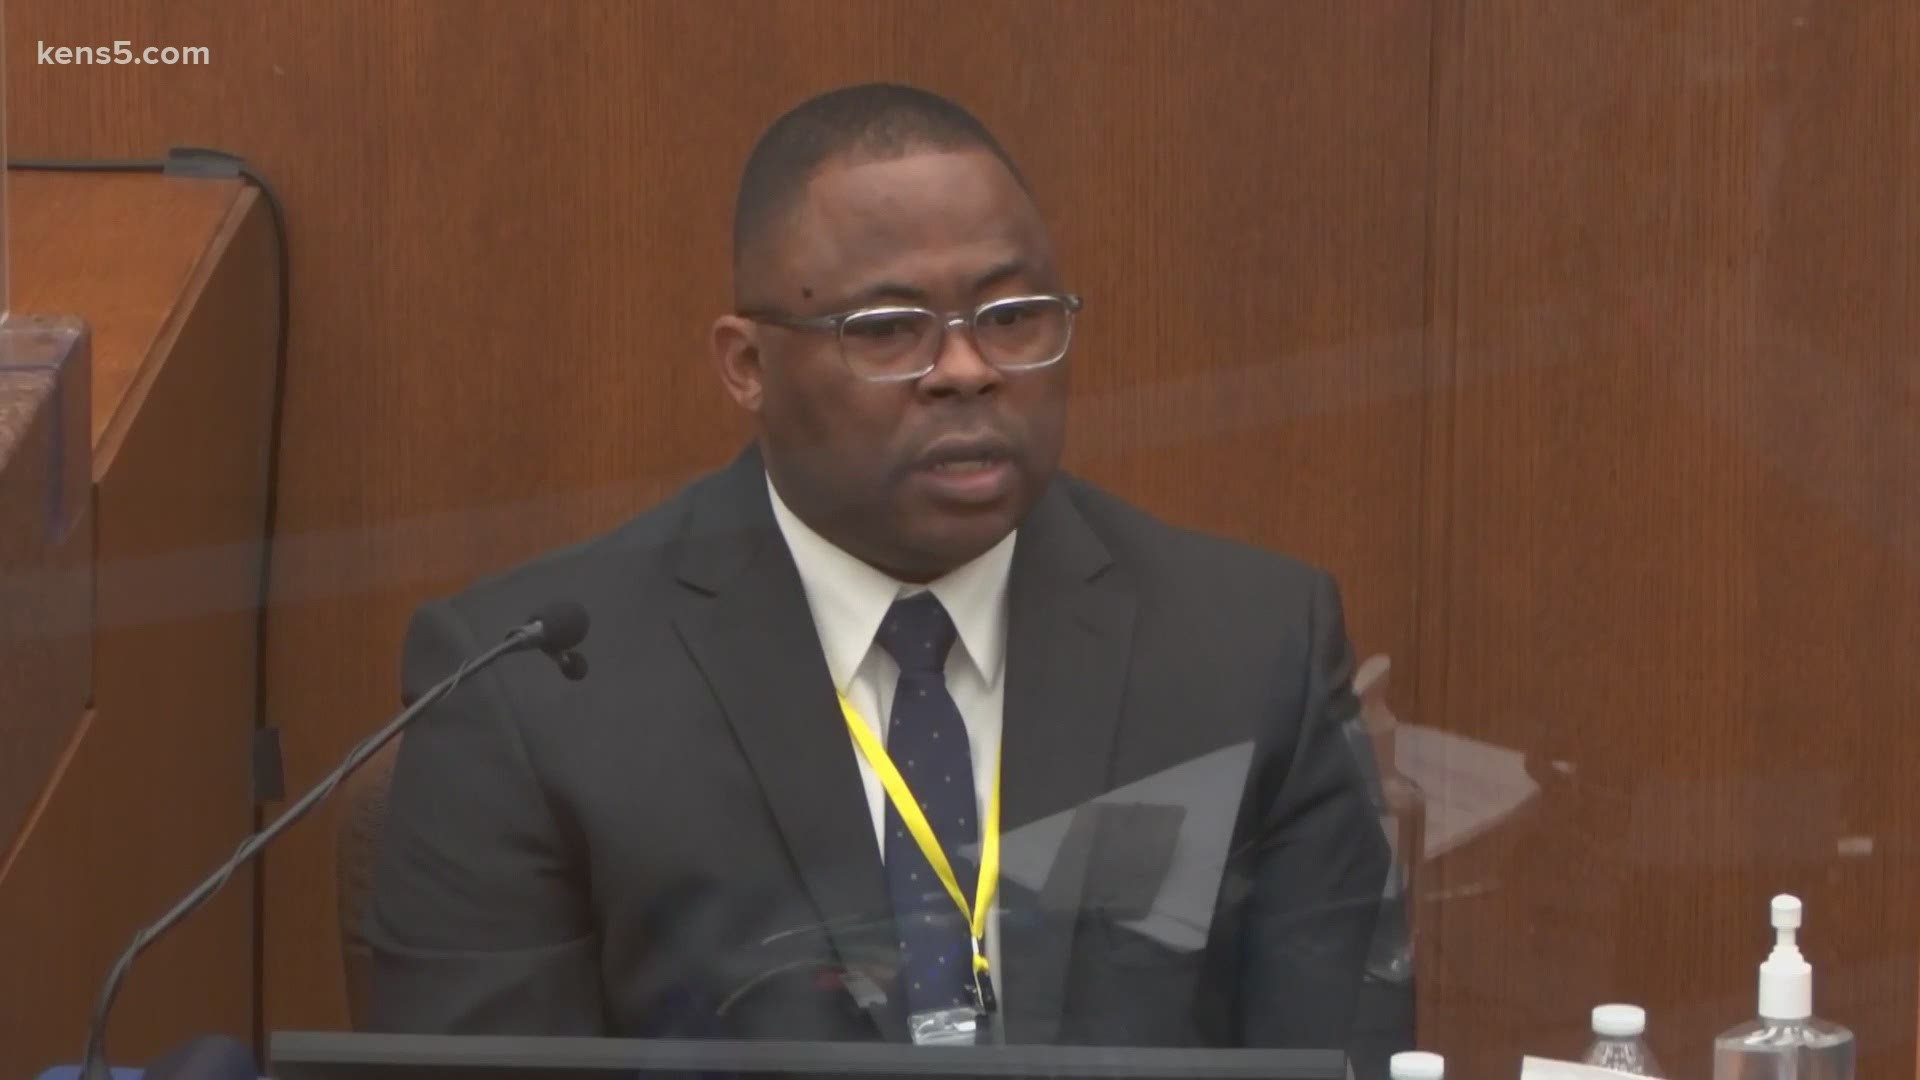 Prosecutors in the trial hired the Los Angeles Police sergeant to provide expertise in assessing Chauvin's actions that killed George Floyd in 2020.